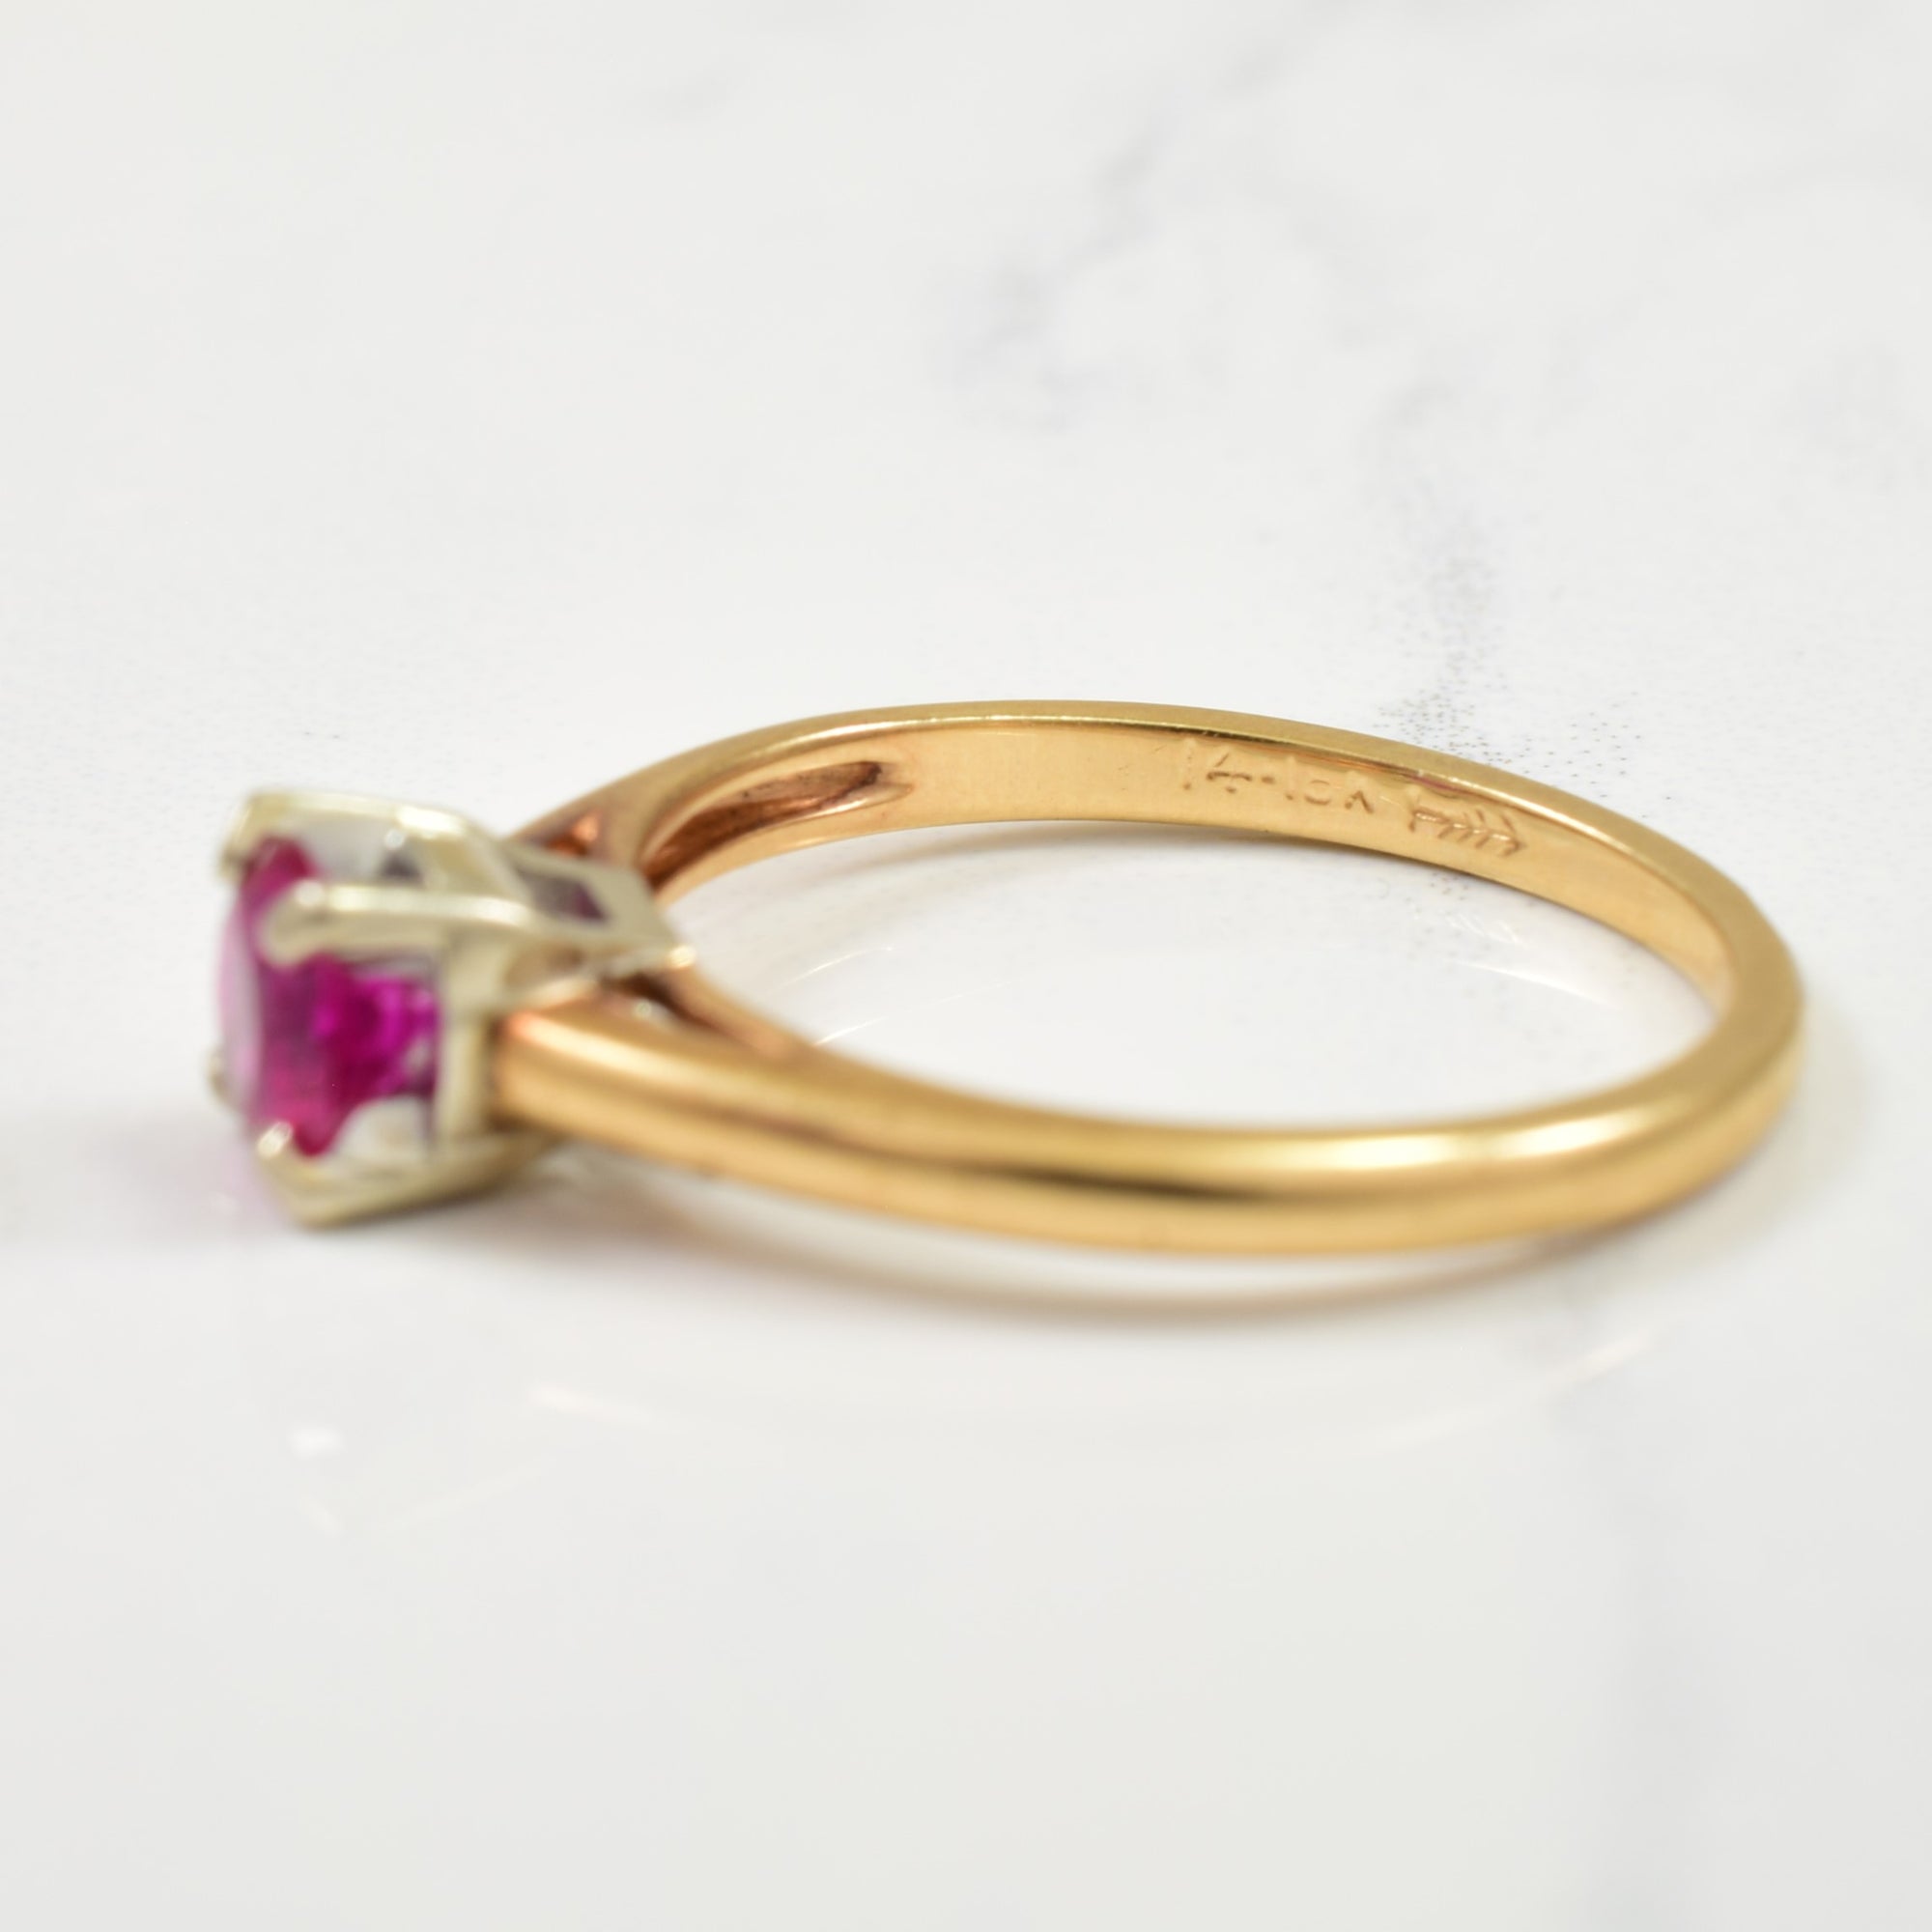 Synthetic Ruby Ring | 0.50ct | SZ 5 |